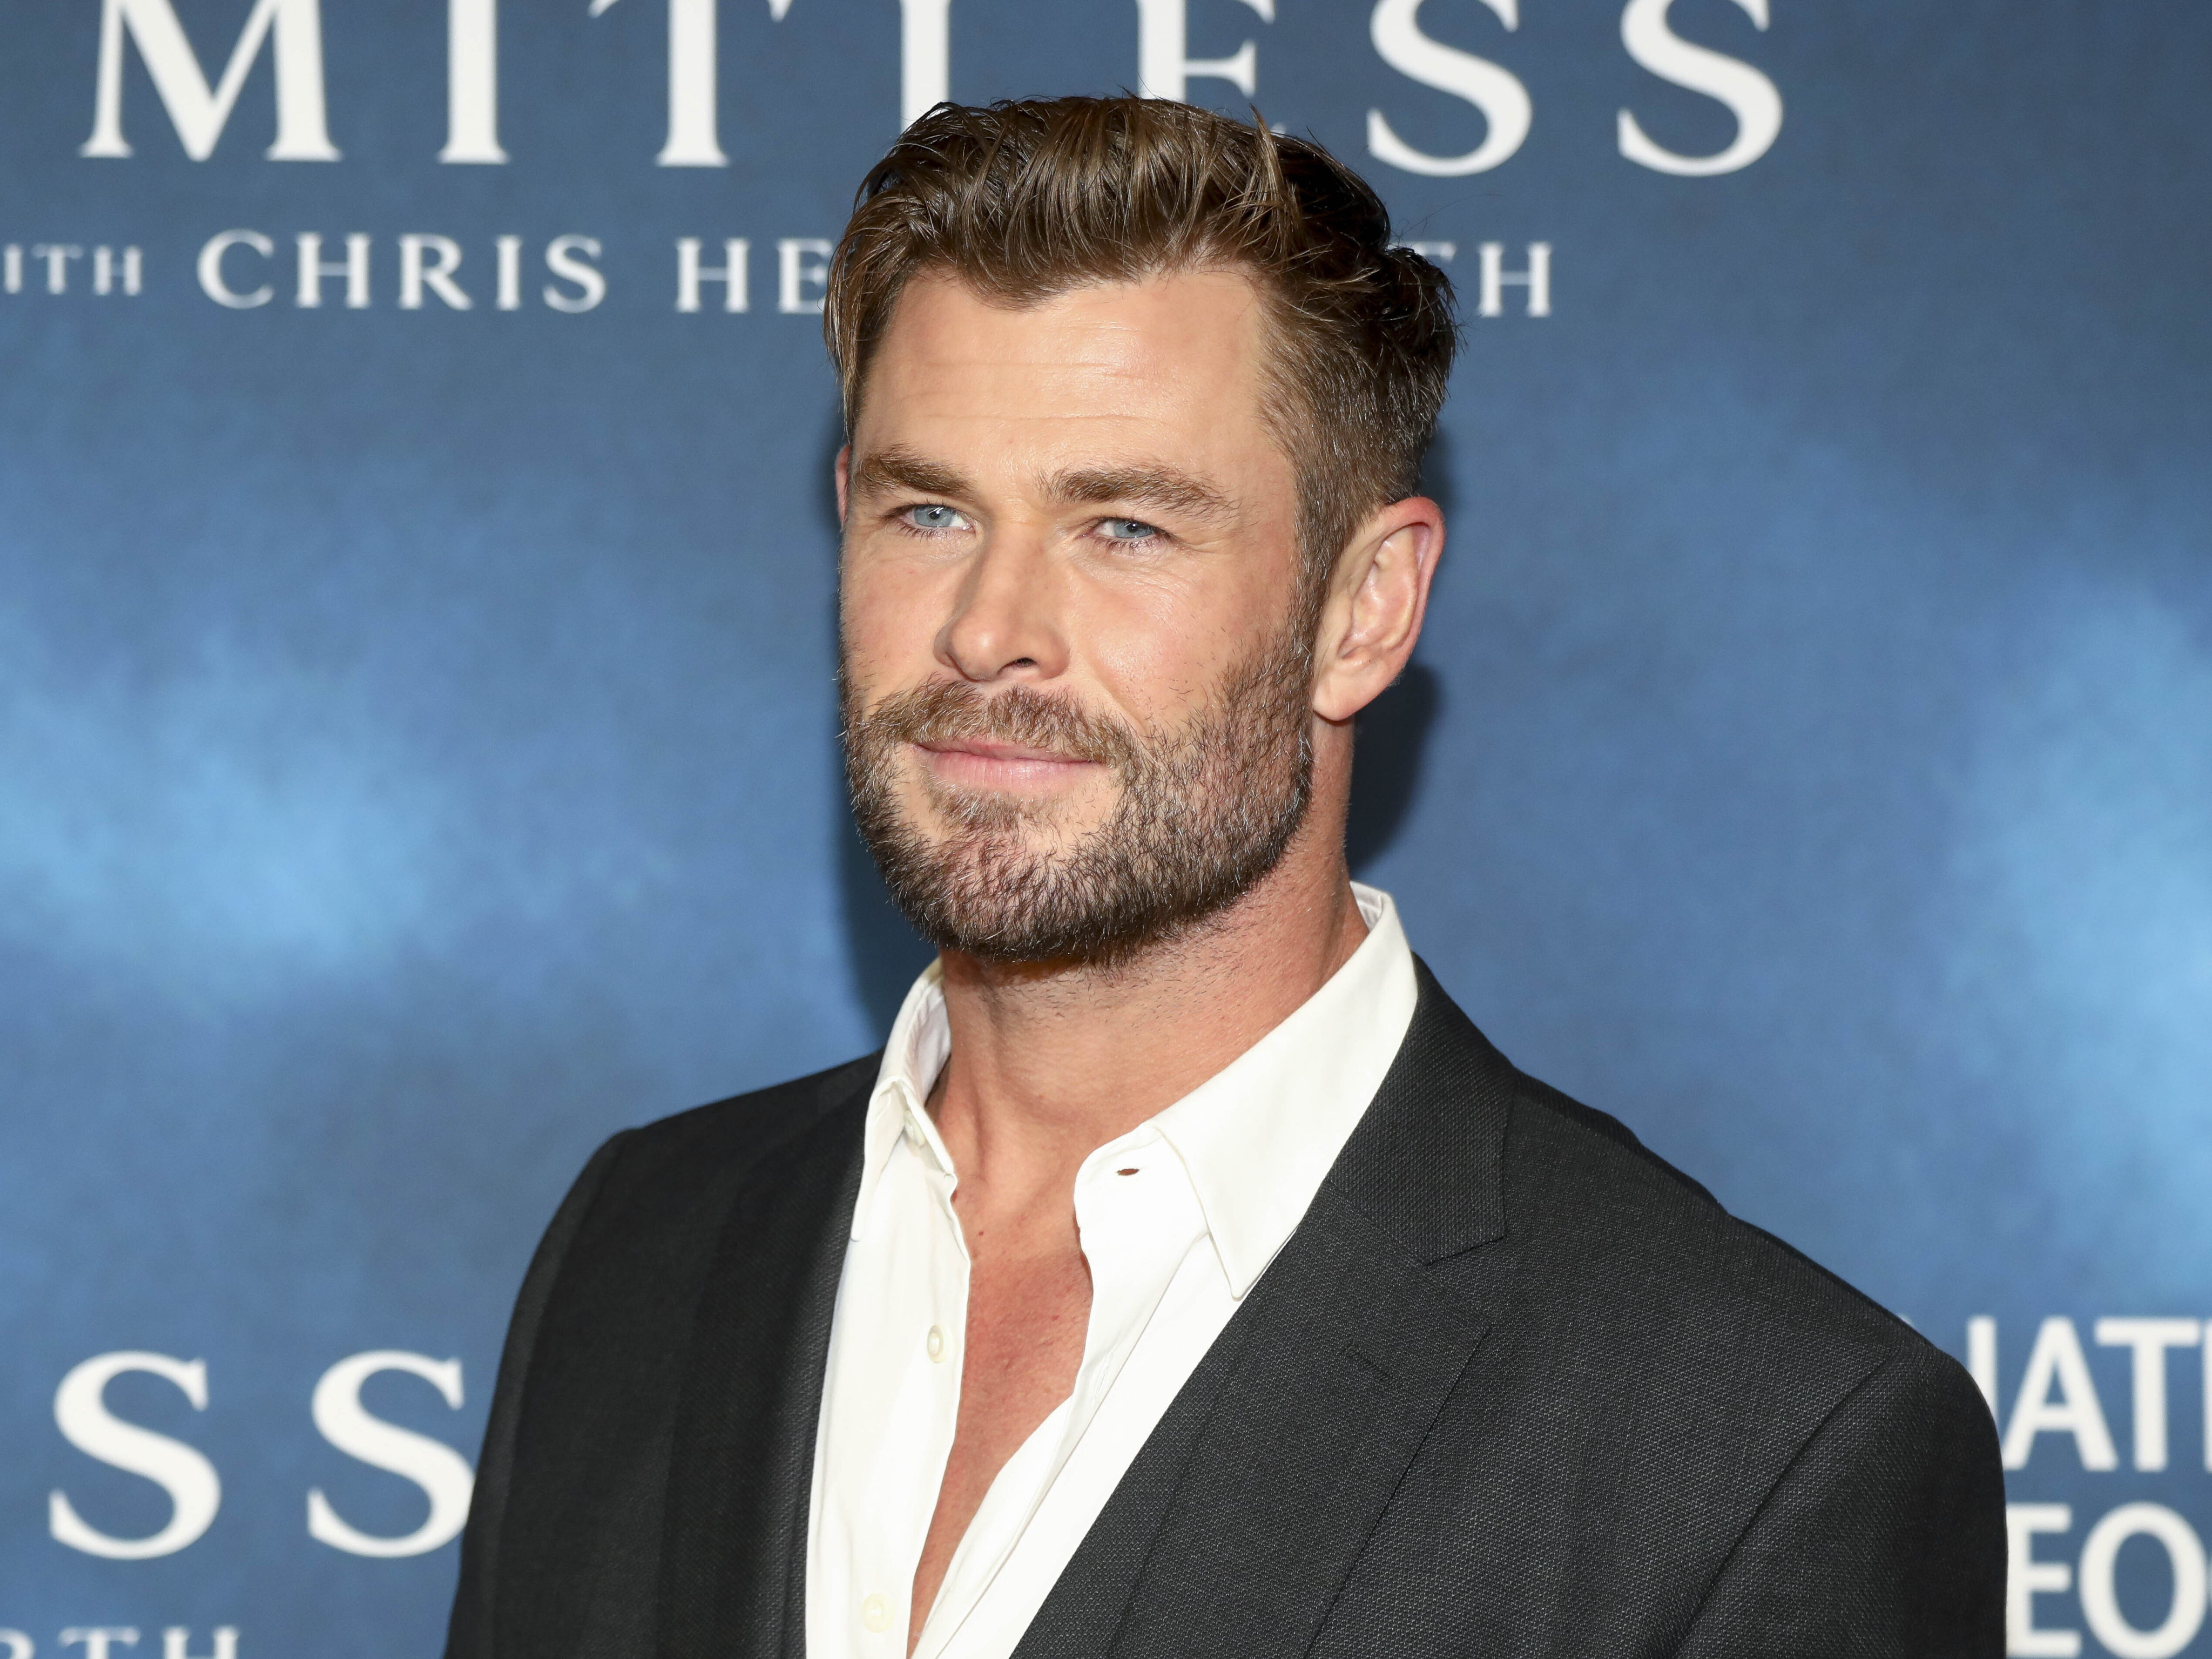 Chris Hemsworth recently announced he’ll be taking a break from acting after a DNA test showed him to be genetically predisposed to Alzheimer’s. Photo: AP